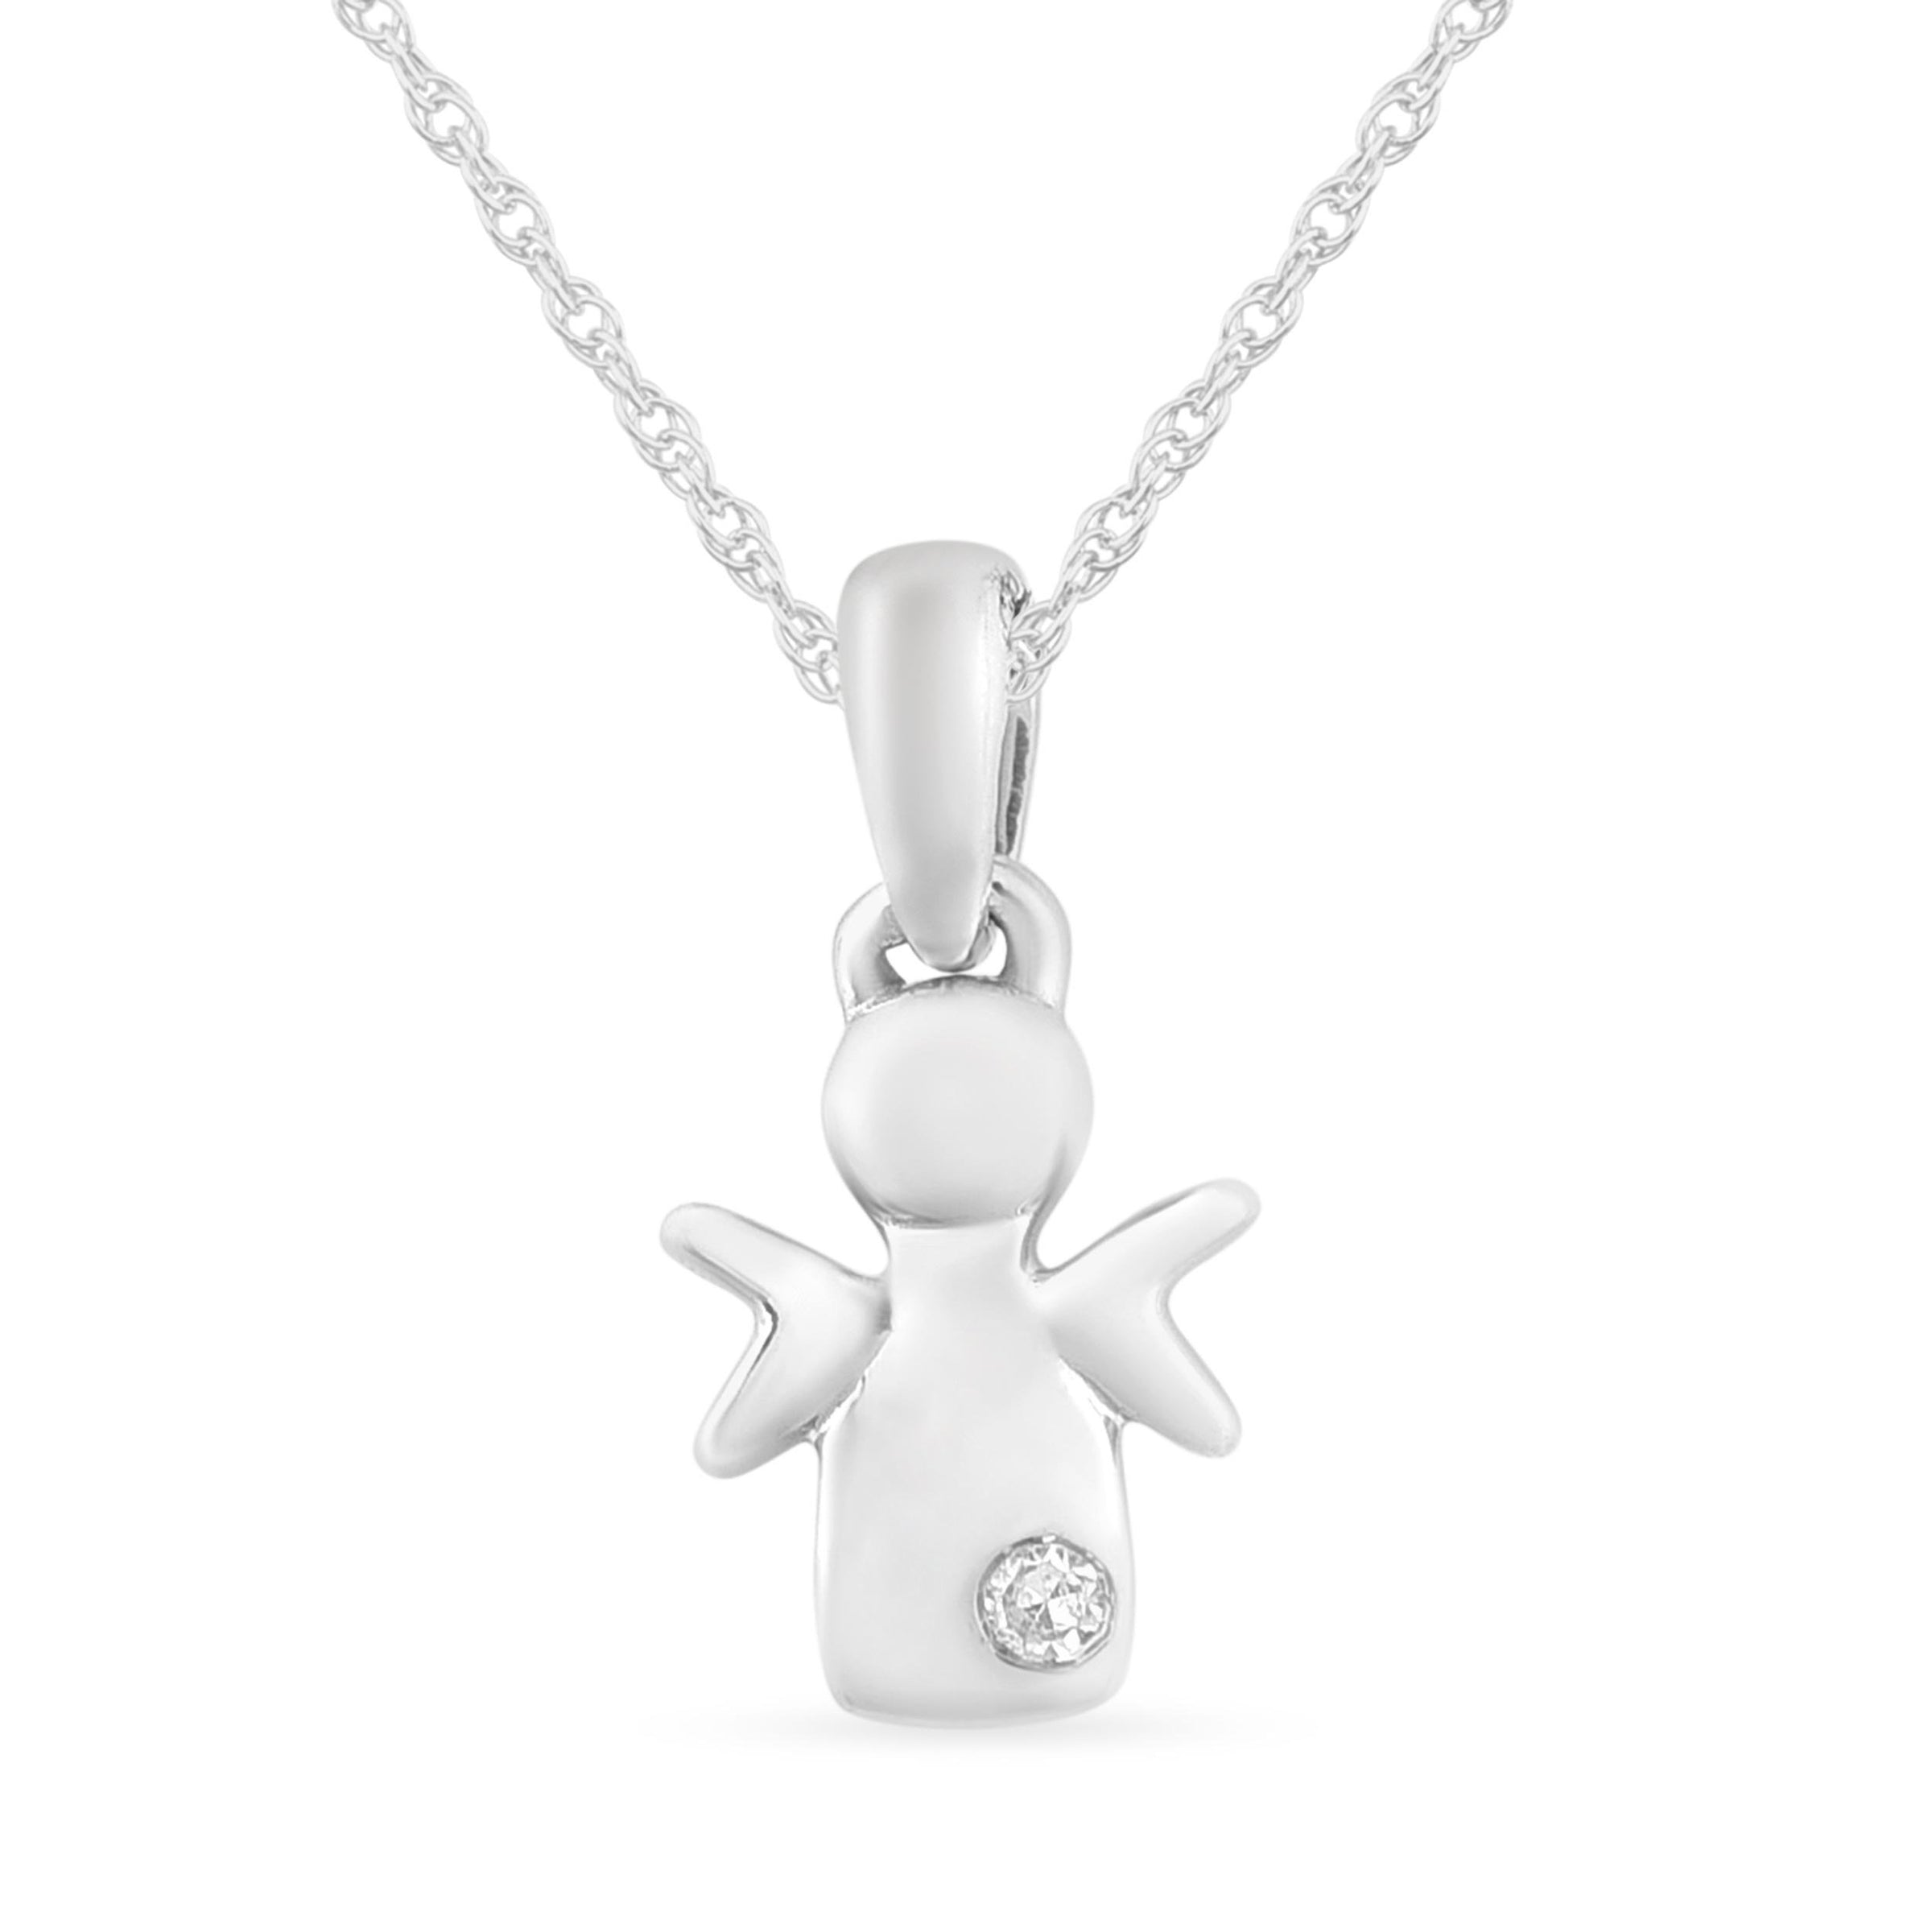 Children's Diamond Angel Necklace in Sterling Silver Necklaces Bevilles 